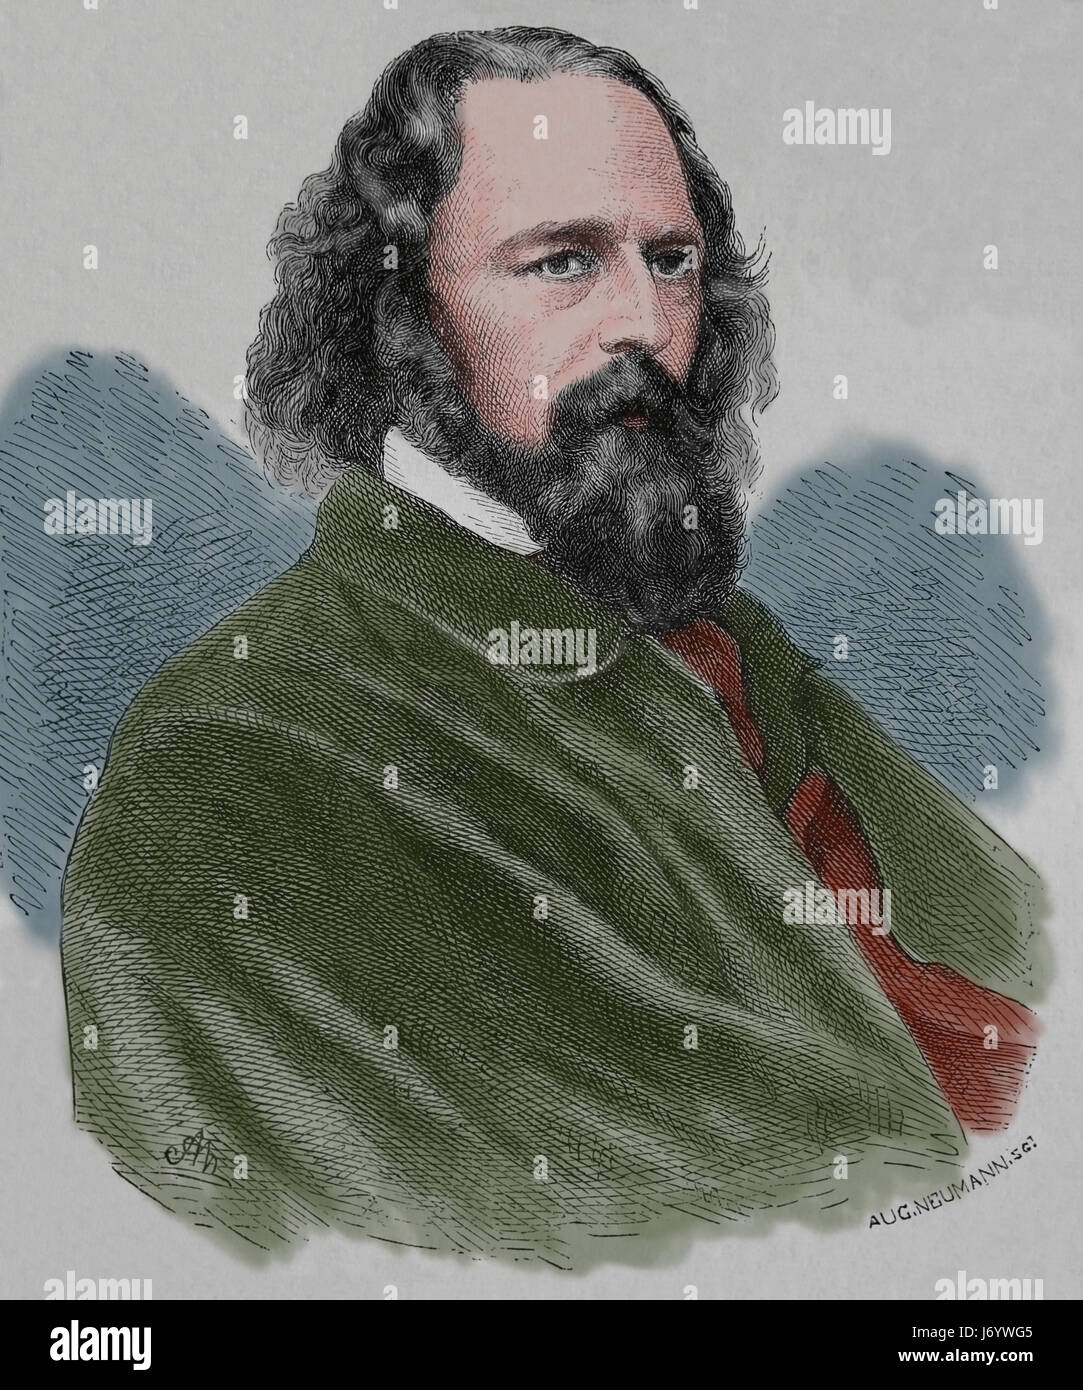 Alfred Tennyson, 1st Baron Tennyson (1809-1892). Poet Laureate of Great Britain and Ireland. Engraving, Over Century 1883. Stock Photo